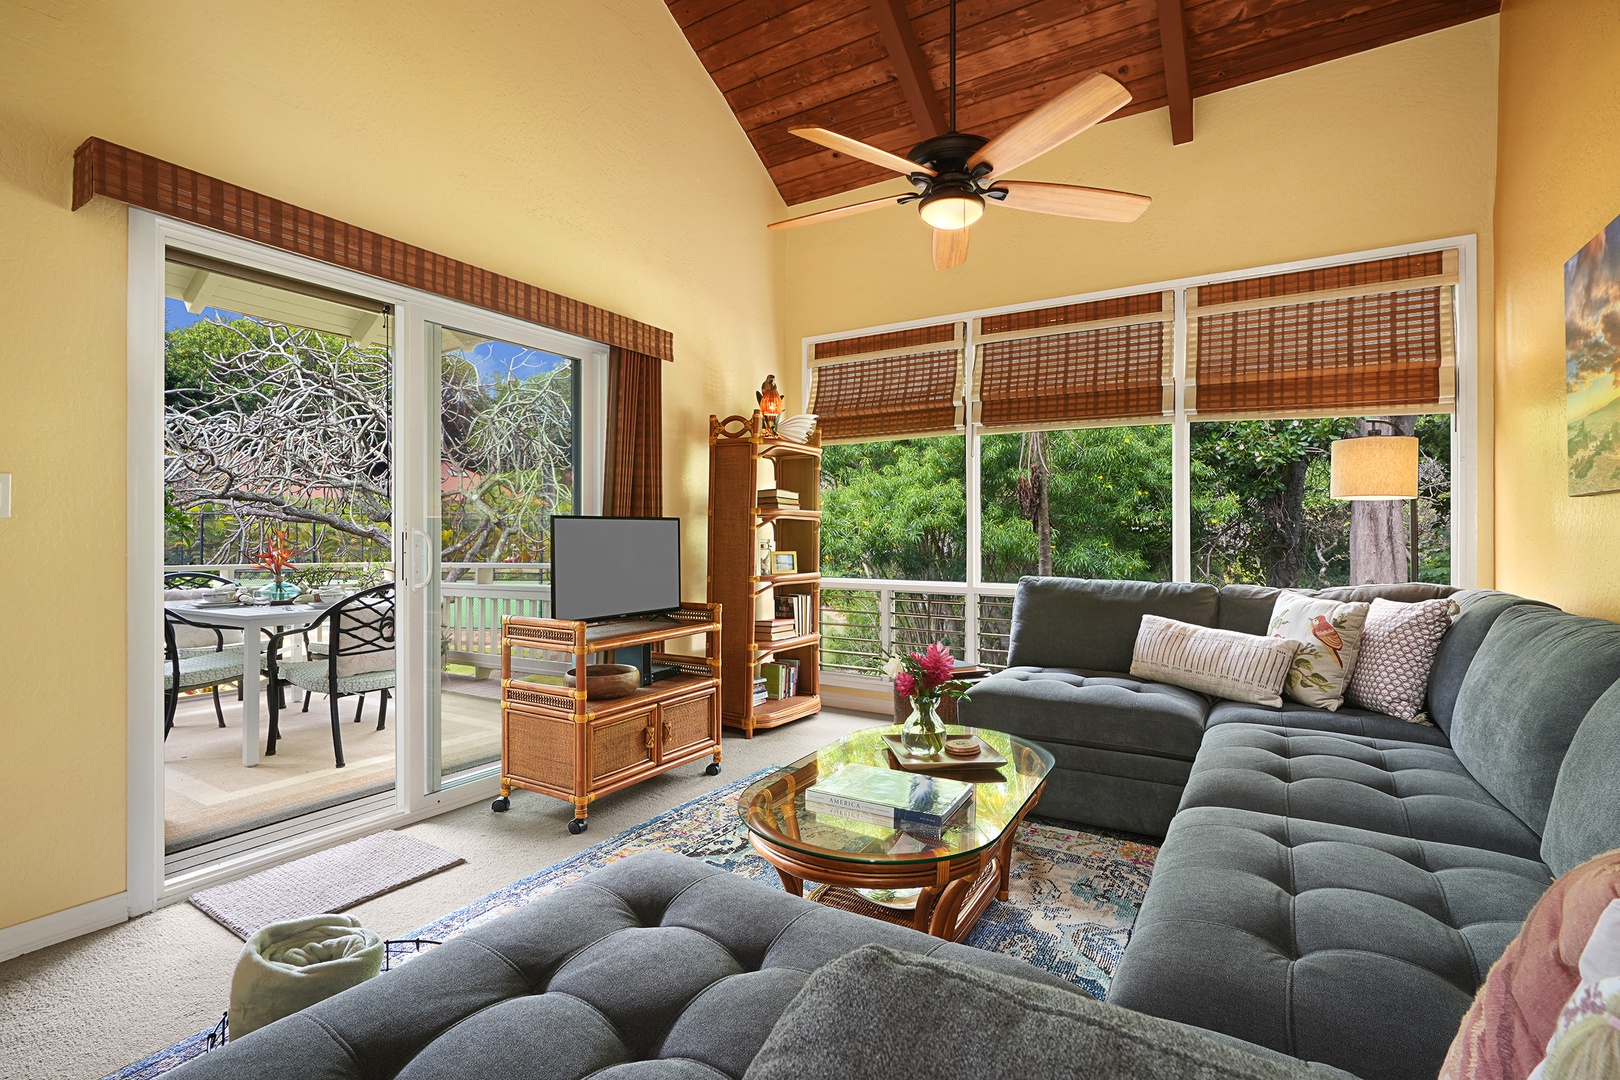 Koloa Vacation Rentals, Kauai Birdsong at Poipu Crater - The cozy living area has a plush sectional sofa, TV and large glass window walls and sliders for a bright and airy ambiance.